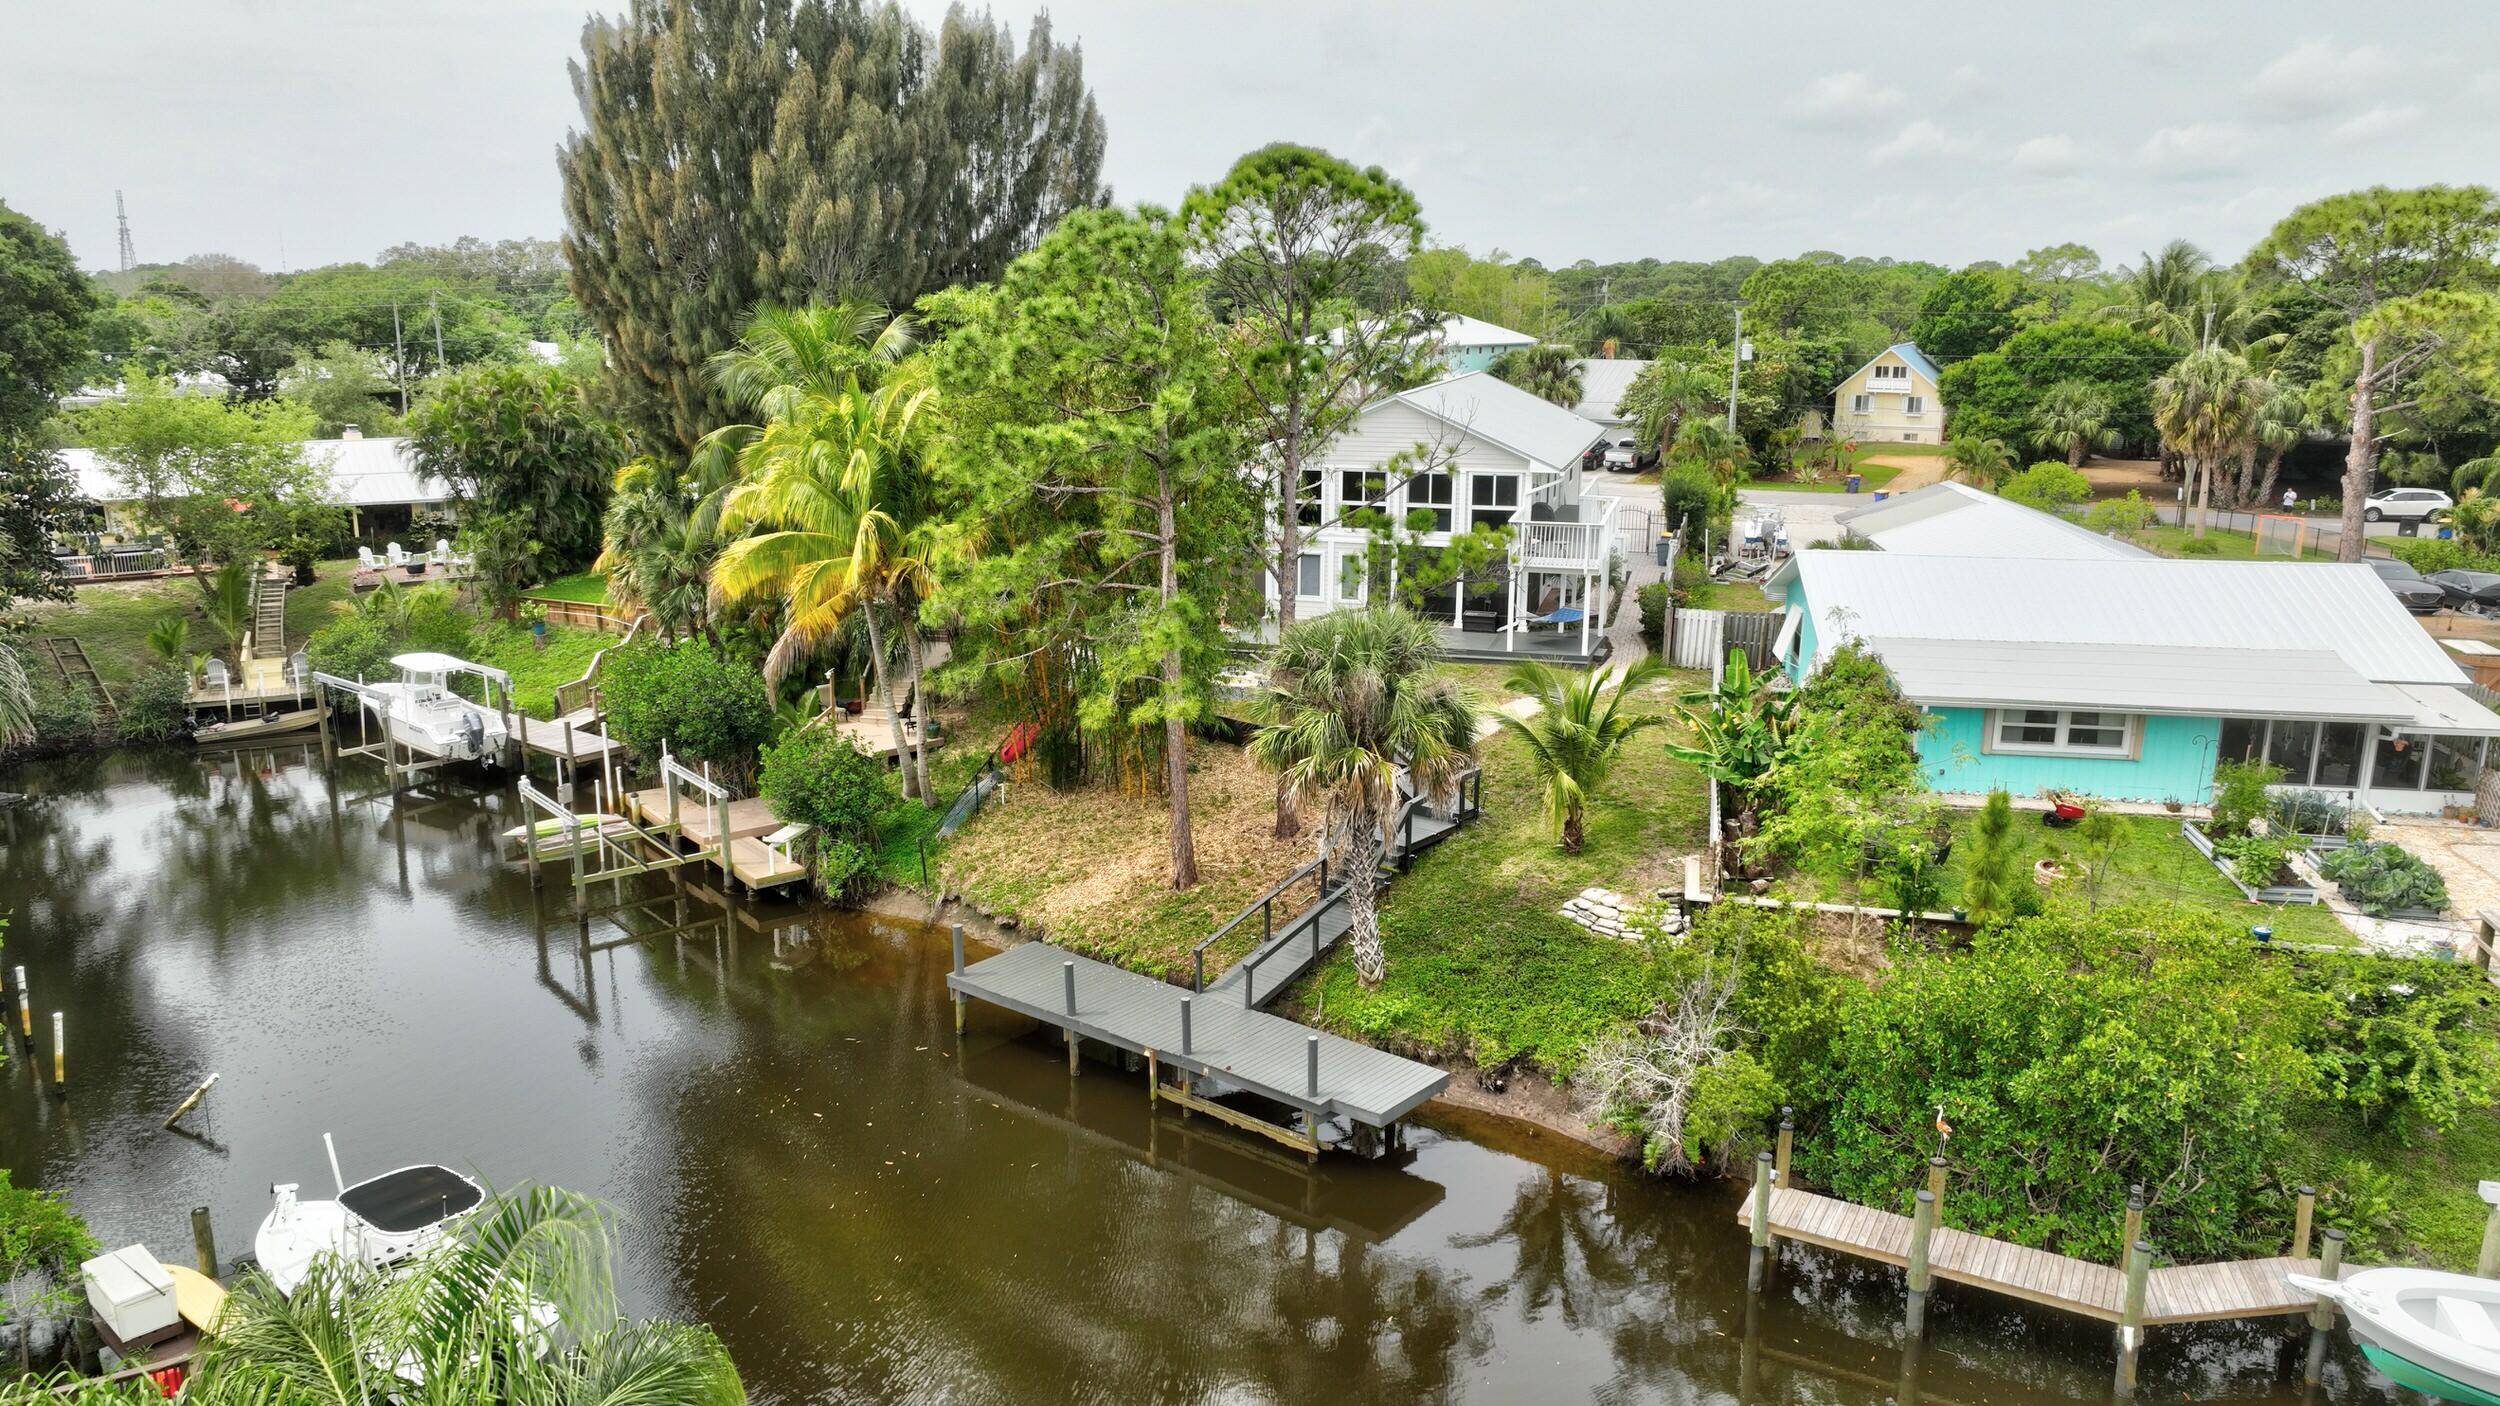 This gorgeous, fully renovated Key West style home is waiting for you !